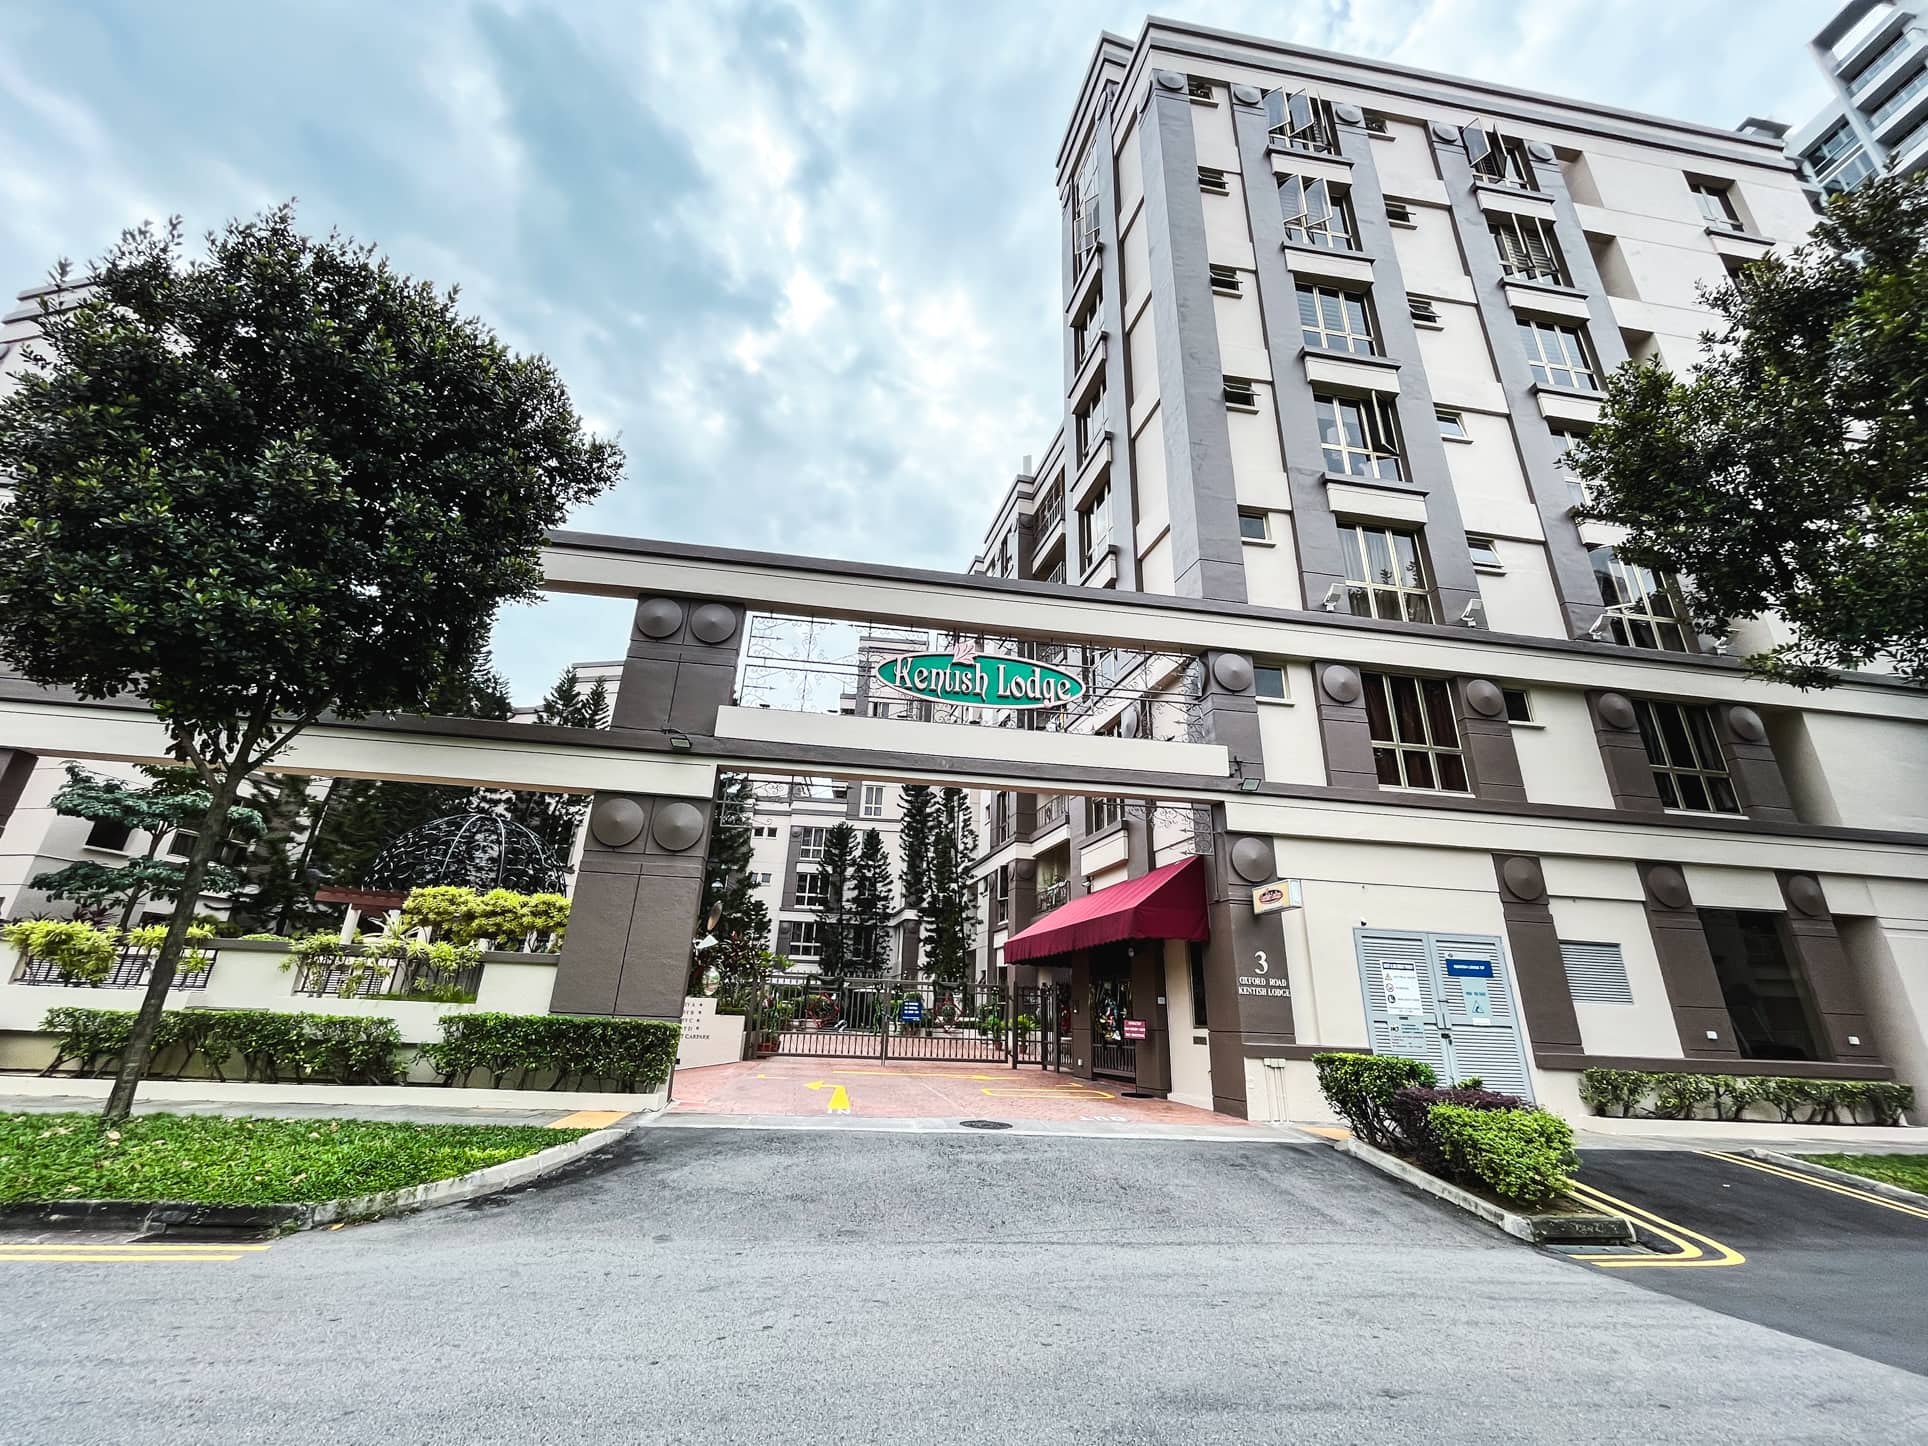 I've Lived At Kentish Lodge In Farrer Park For 5 Years: Here's My Review Of This Small But Convenient Condo